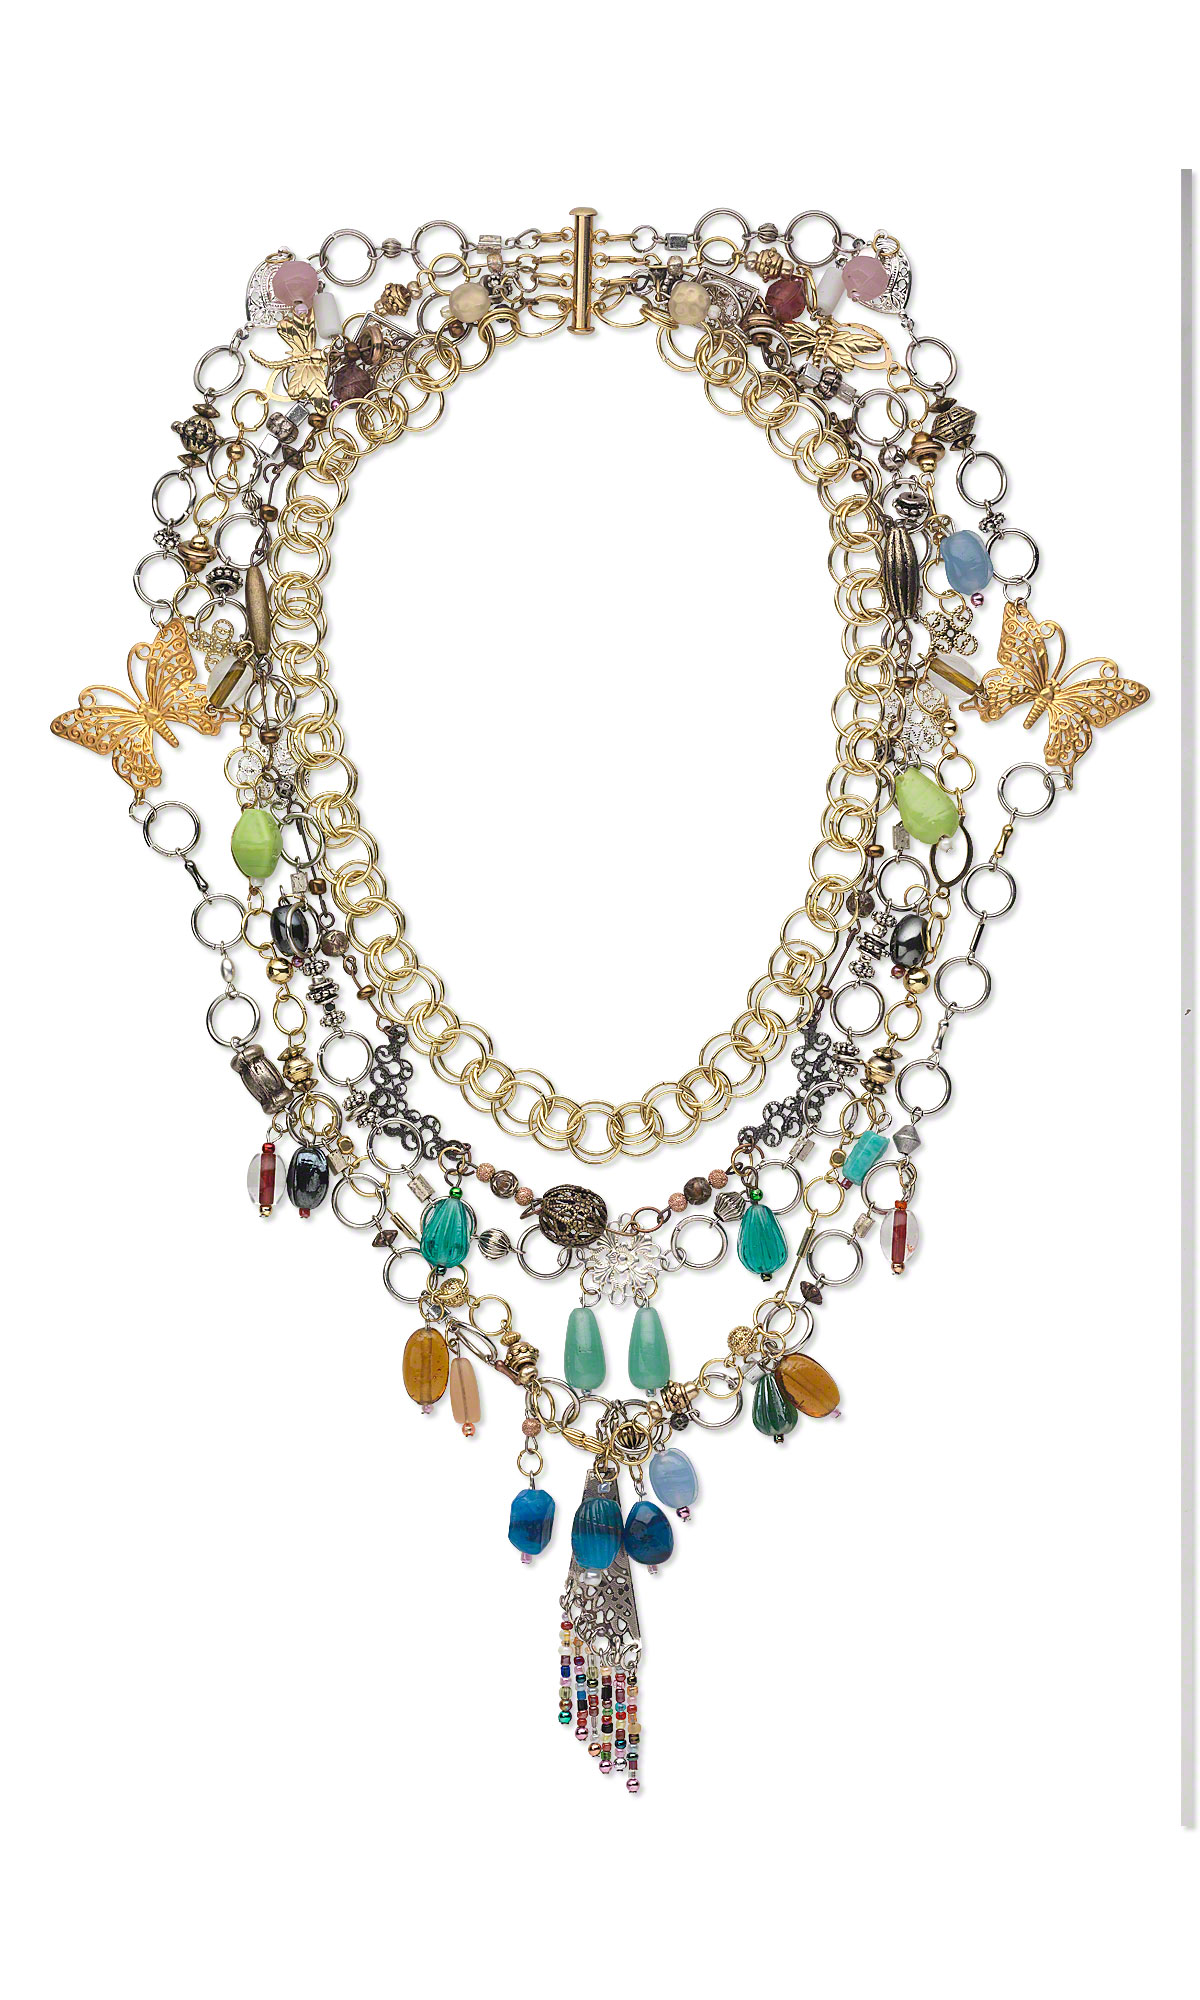 Jewelry Design - Multi-Strand Necklace with Assorted Beads from The ...